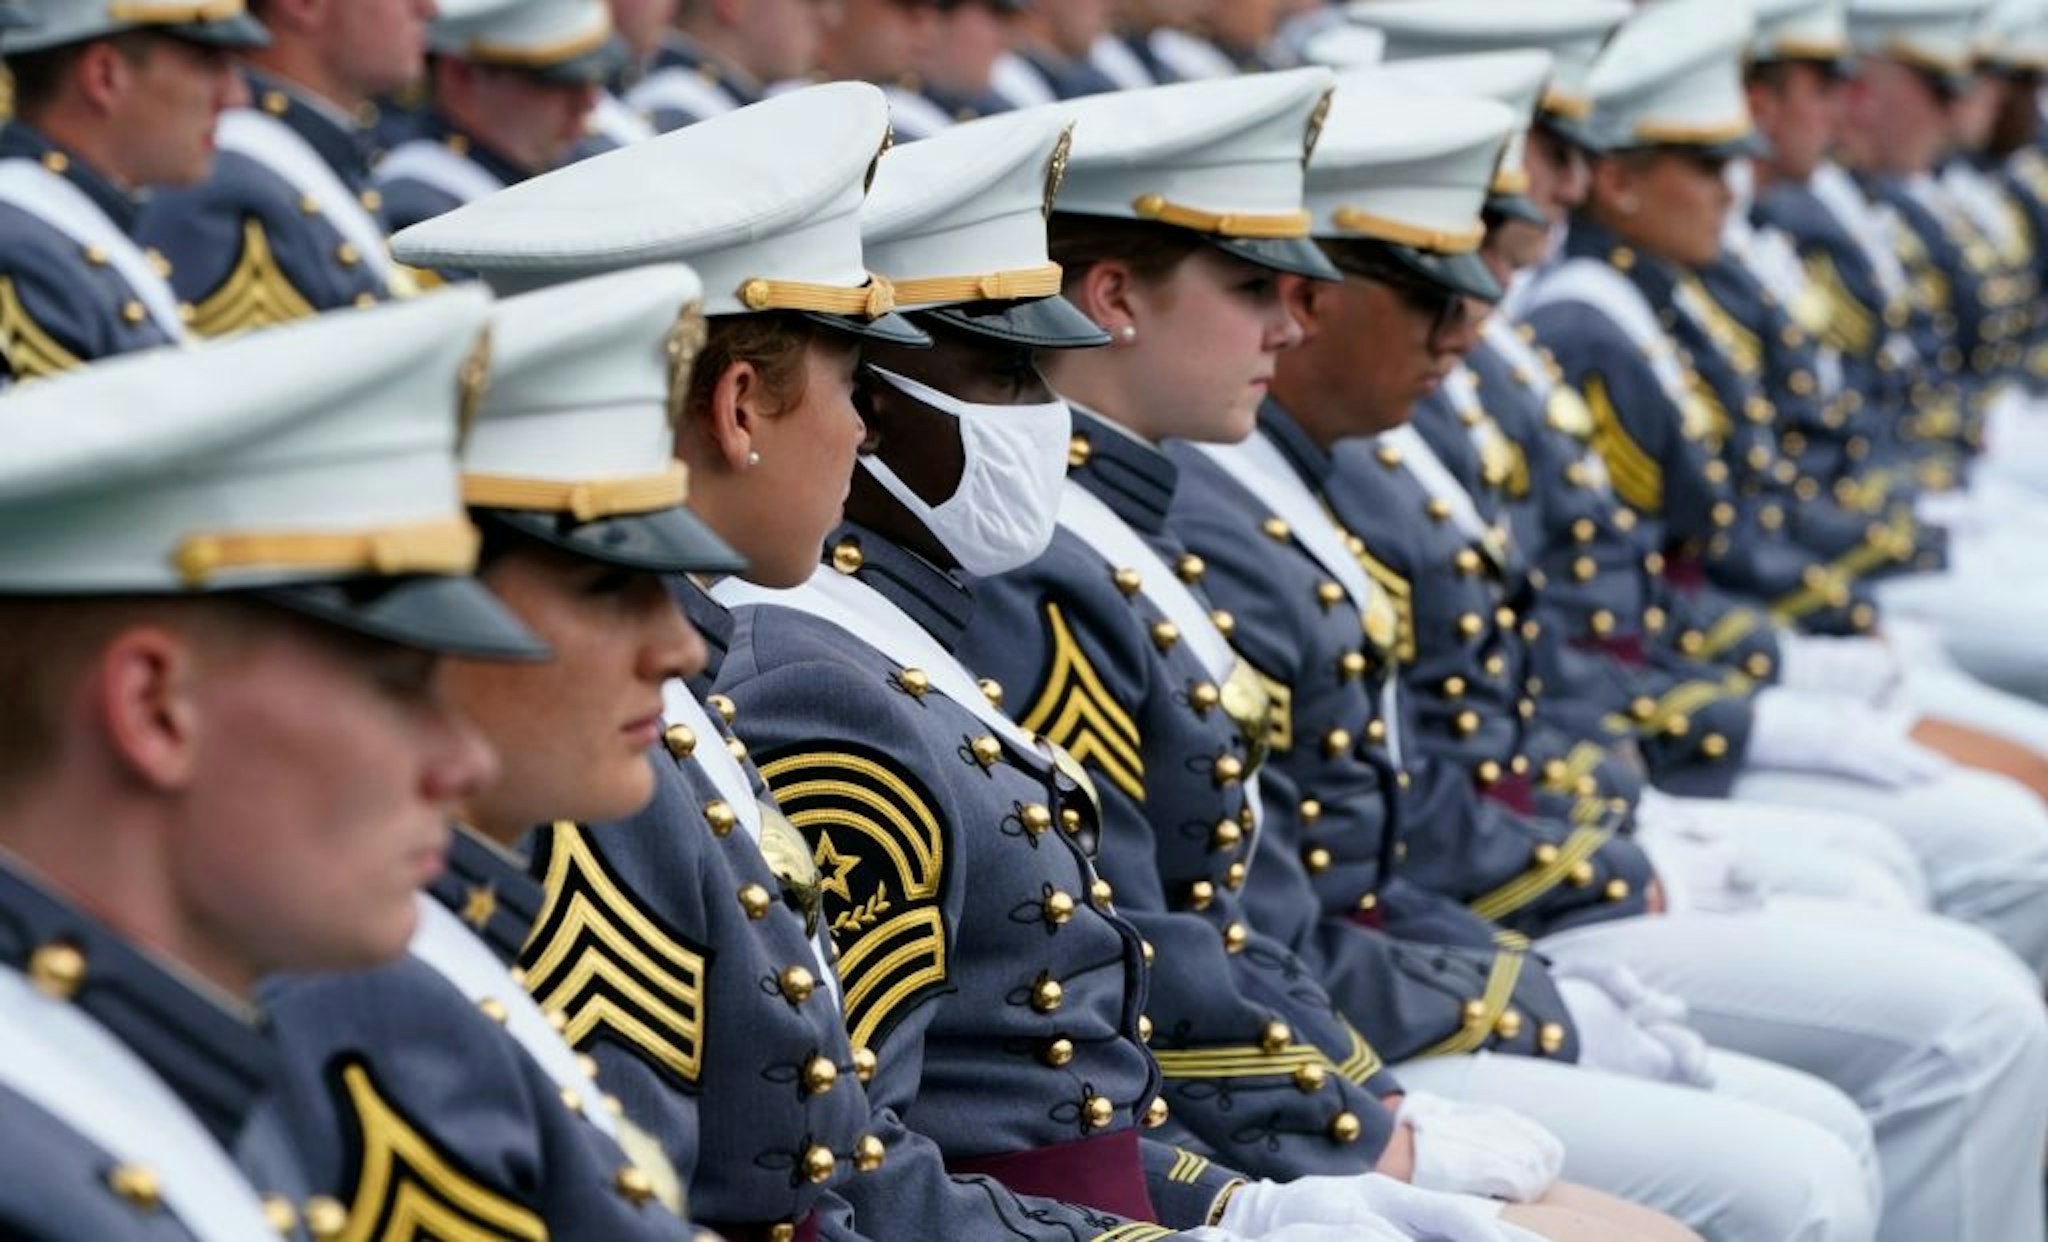 The Class of 2021 look on at the US Military Academy's Class of 2021 graduation ceremony at Michie Stadium West Point, New York on May 22,2021. (Photo by TIMOTHY A. CLARY / AFP) (Photo by TIMOTHY A. CLARY/AFP via Getty Images)